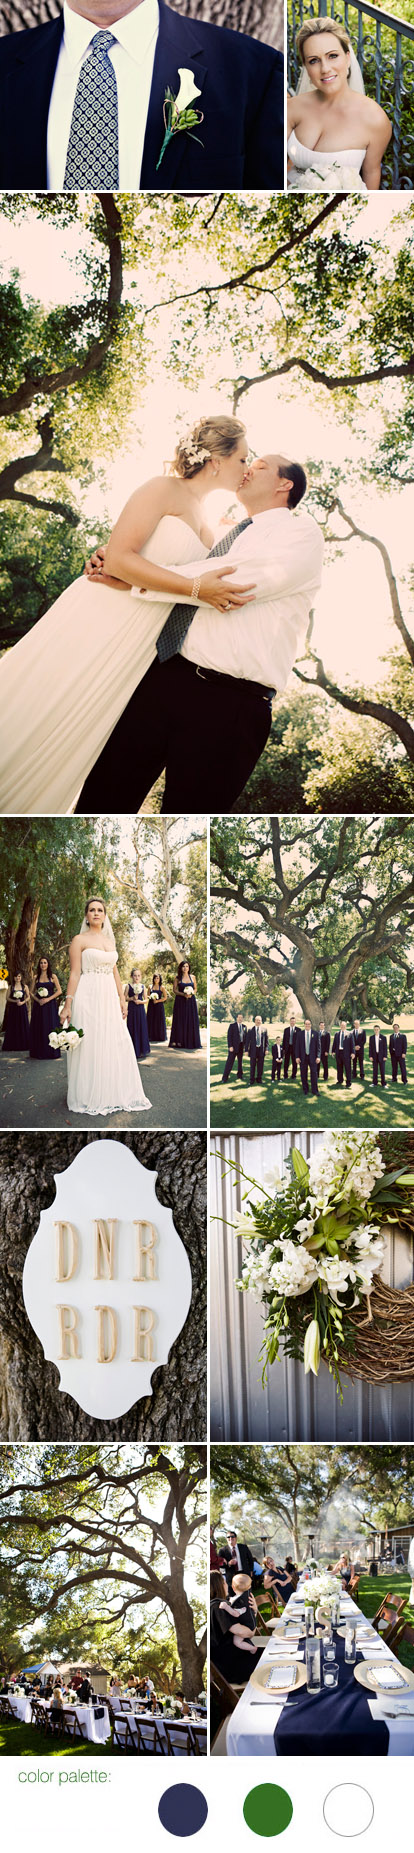 California backyard barbecue wedding, navy blue and emerald green wedding color palette, images by Jagger Photography